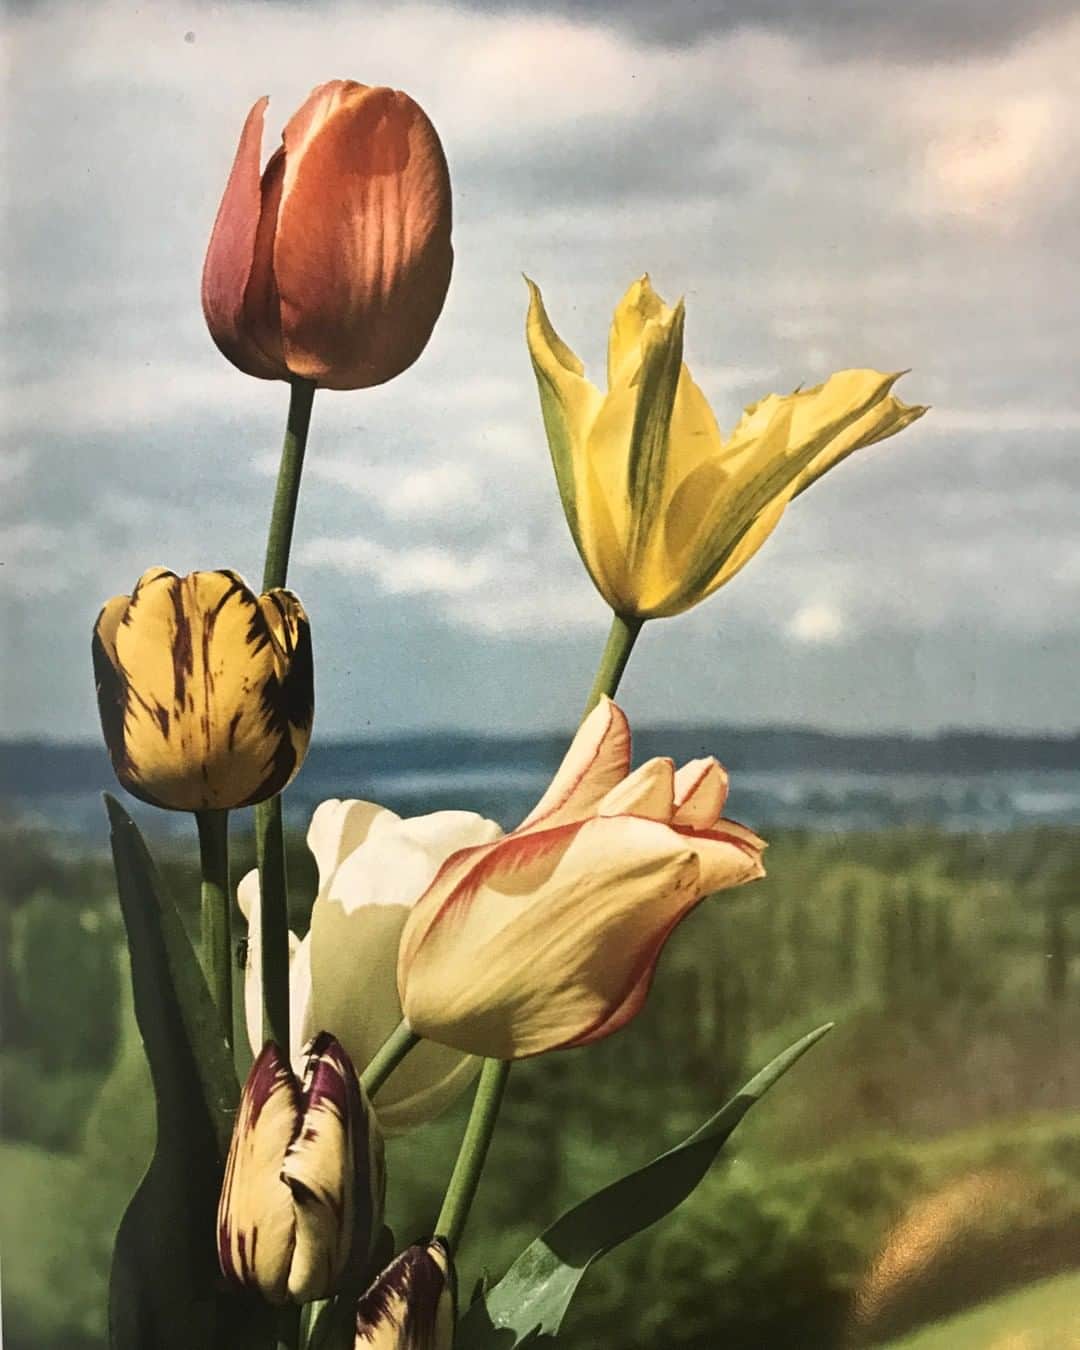 Paul Smithのインスタグラム：「Amsterdam has long been one of my favourite places to visit, not least because of the proliferation of tulips – one of my favourite flowers. It's also why I'm pleased to let you know that we've recently opened our very own new shop in the city which you'll find in the De 9 Straatjes. You can find out more over on my grown-up account @paulsmithdesign – but please do pop in to say hello if you're in the area.  #FromTheArchive #TakenByPaul」